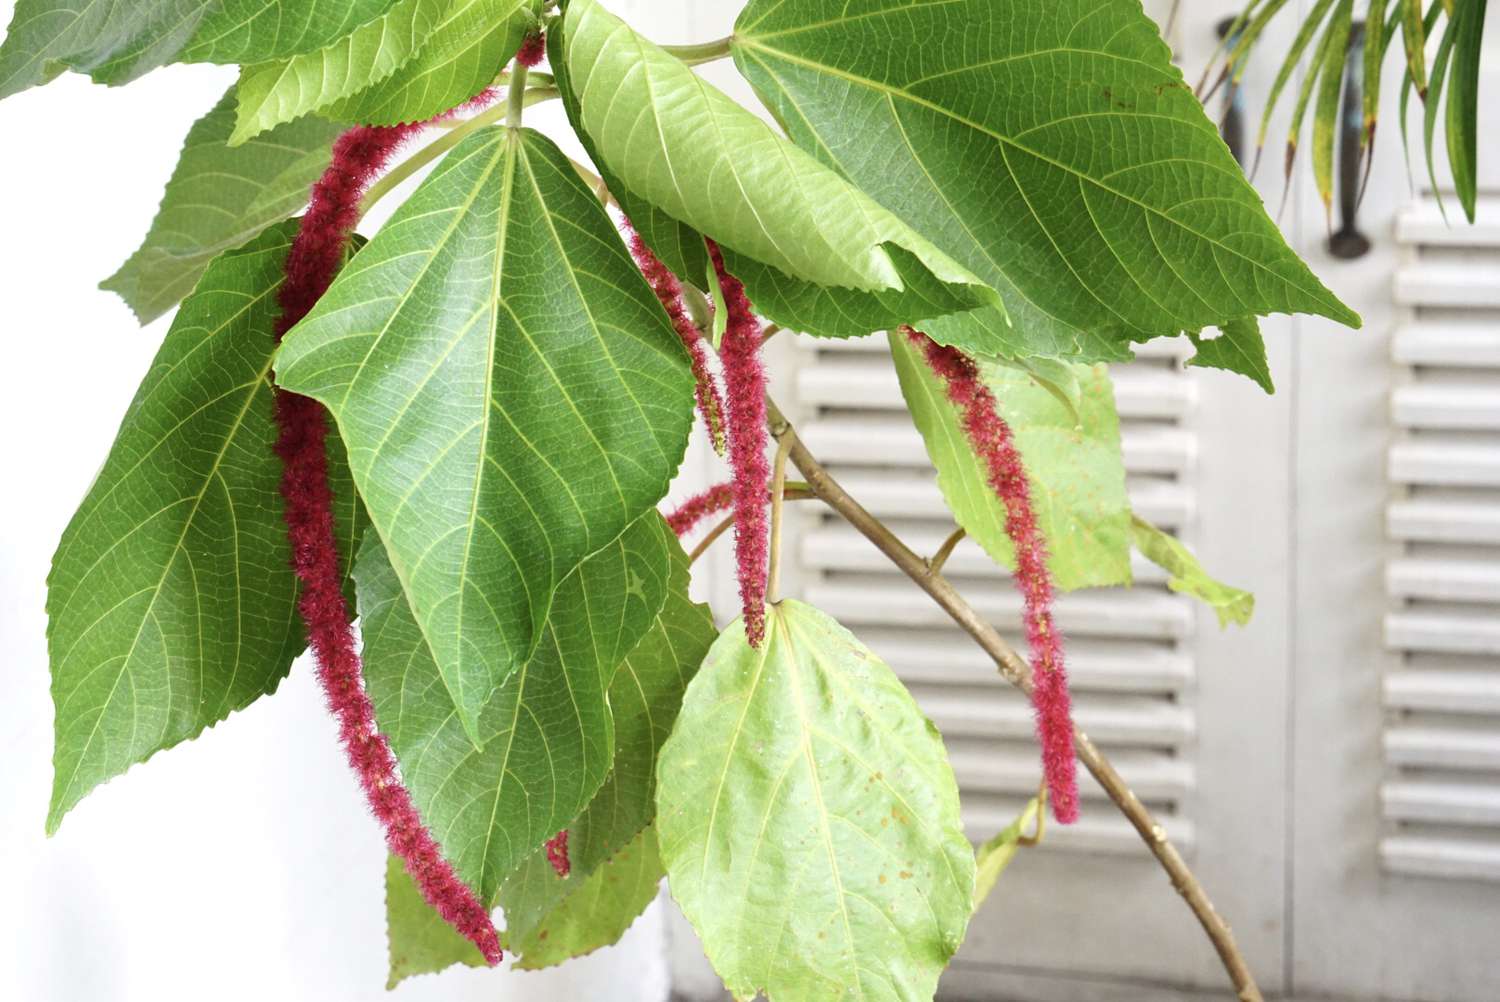 Acalypha plant with large leaves and red bottle brush-like flowers hanging 